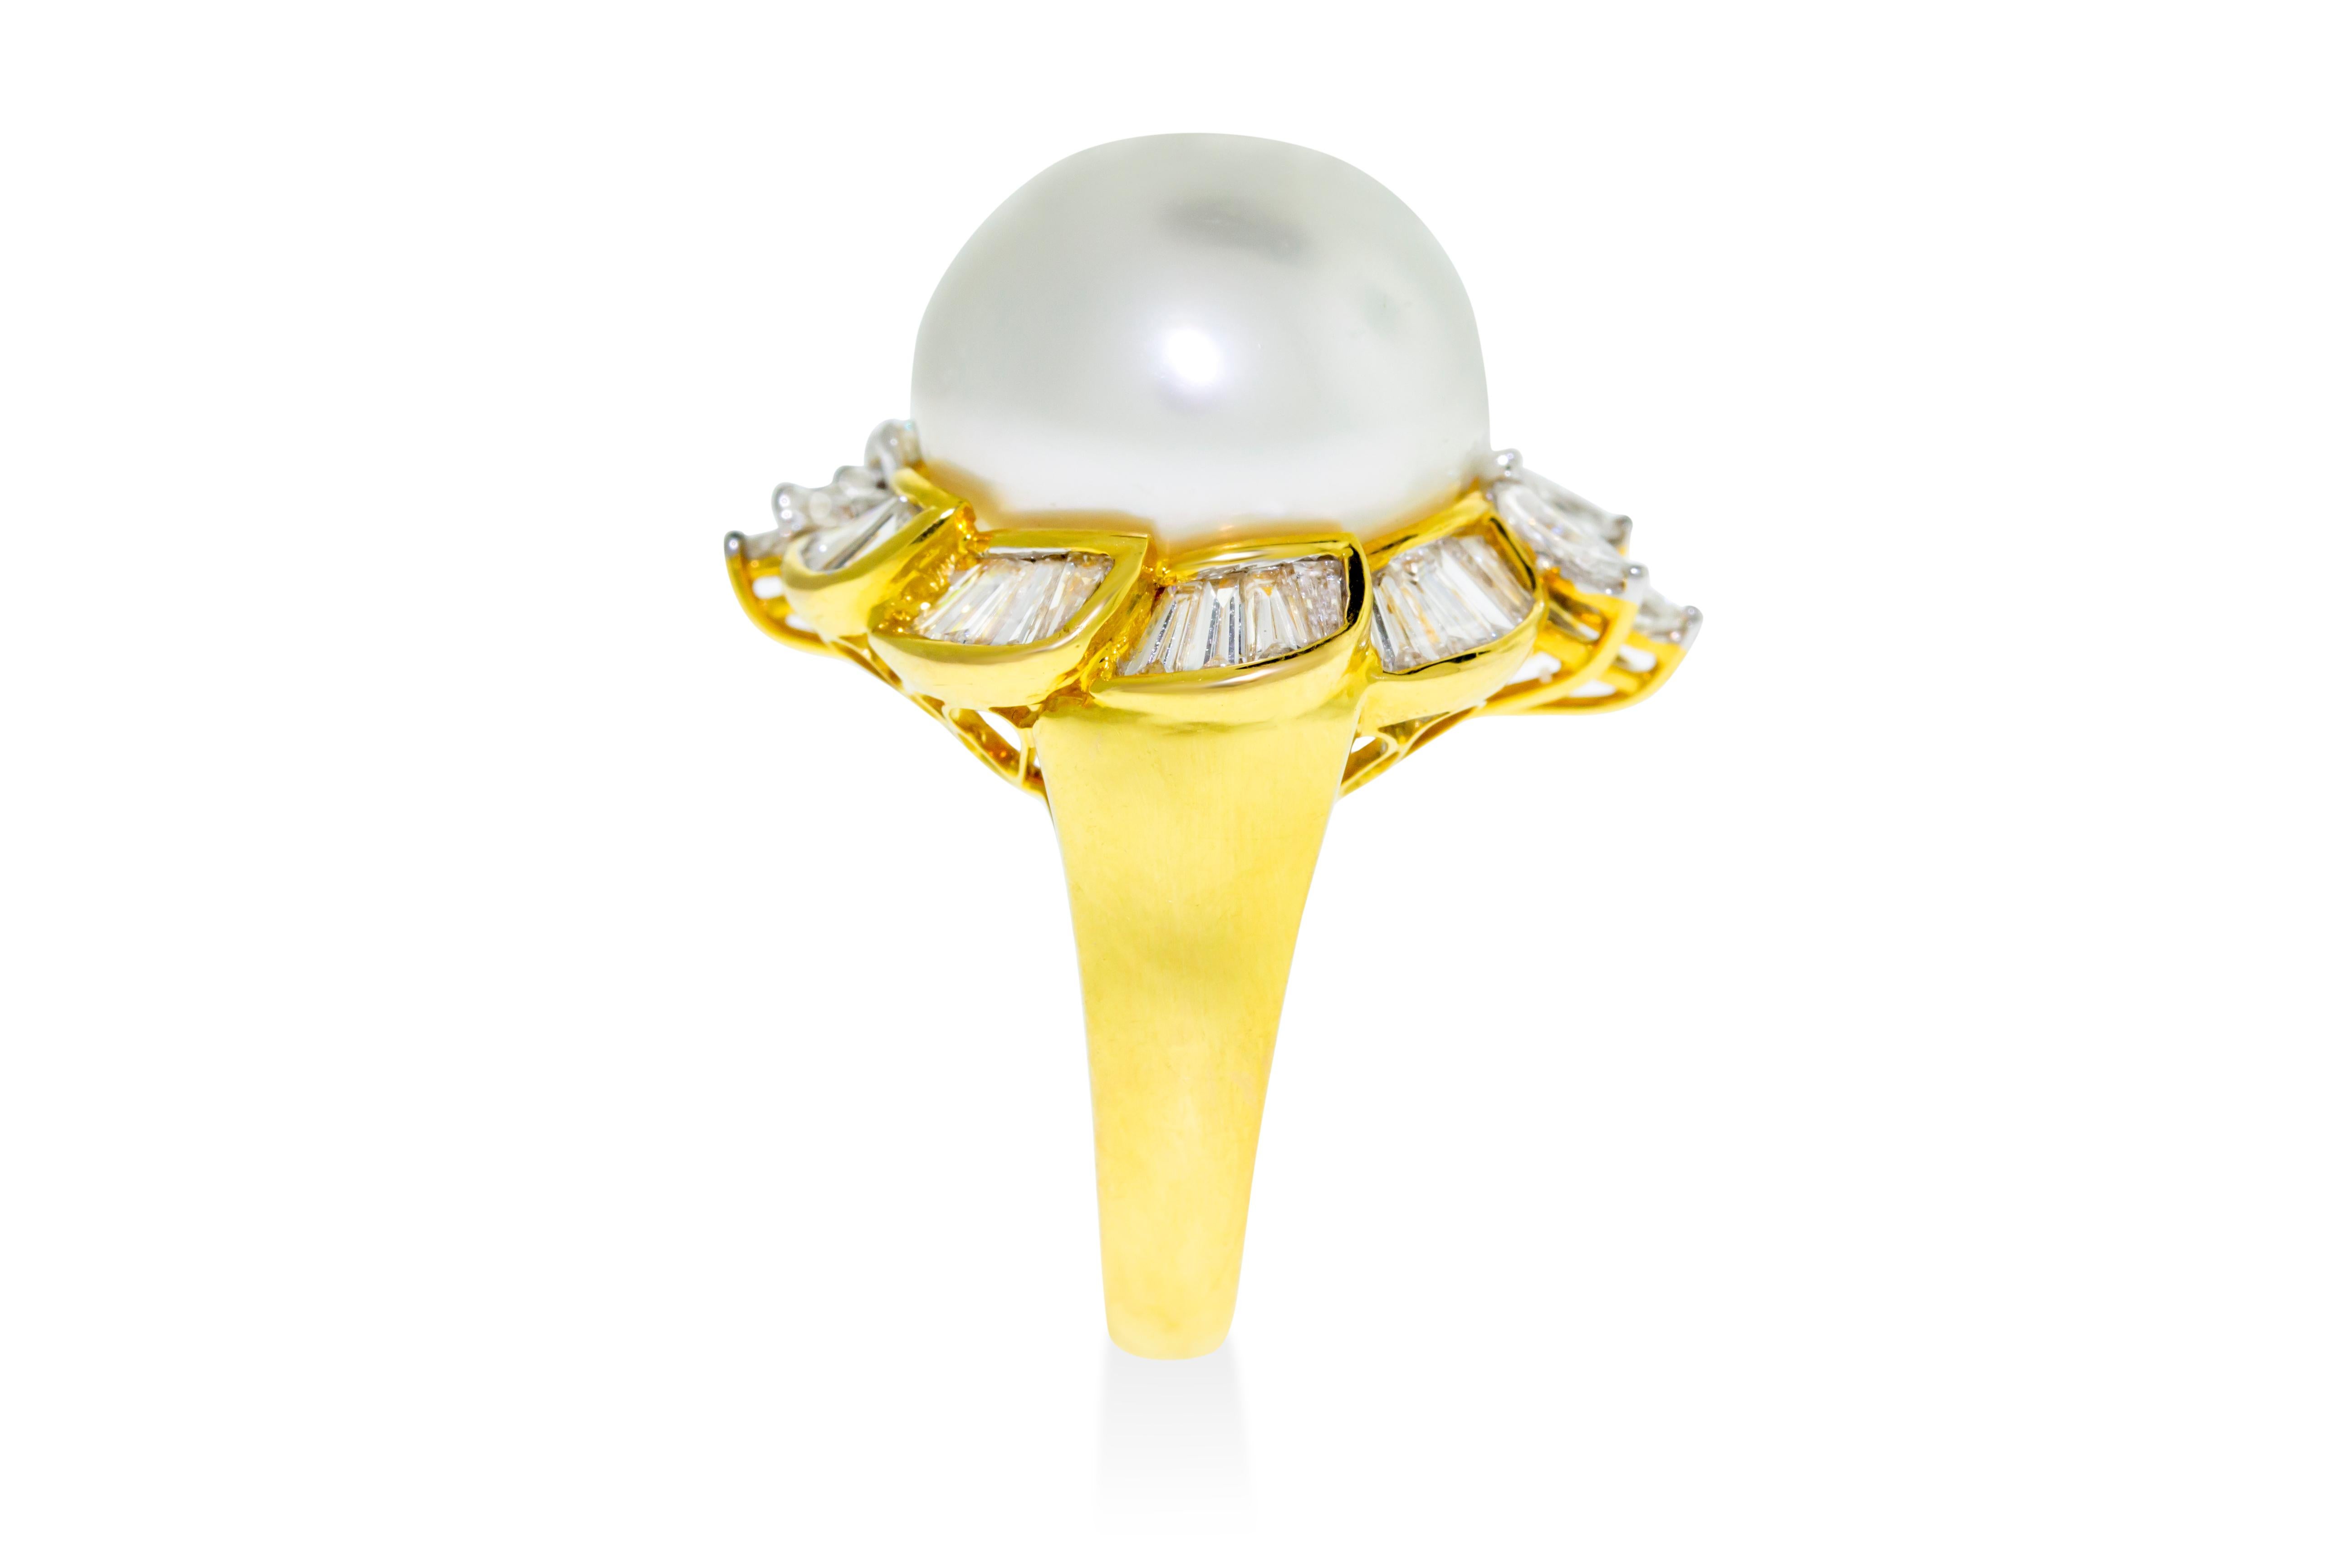 This cocktail ring features a 15 millimeter South Sea pearl set in 13 grams of yellow gold surrounded by 2.45 carats G-H VS marquise and channel set baguette diamonds. Approximately 0.5 inches wide. Size 6. Made in Italy. 

Can be sized down upon